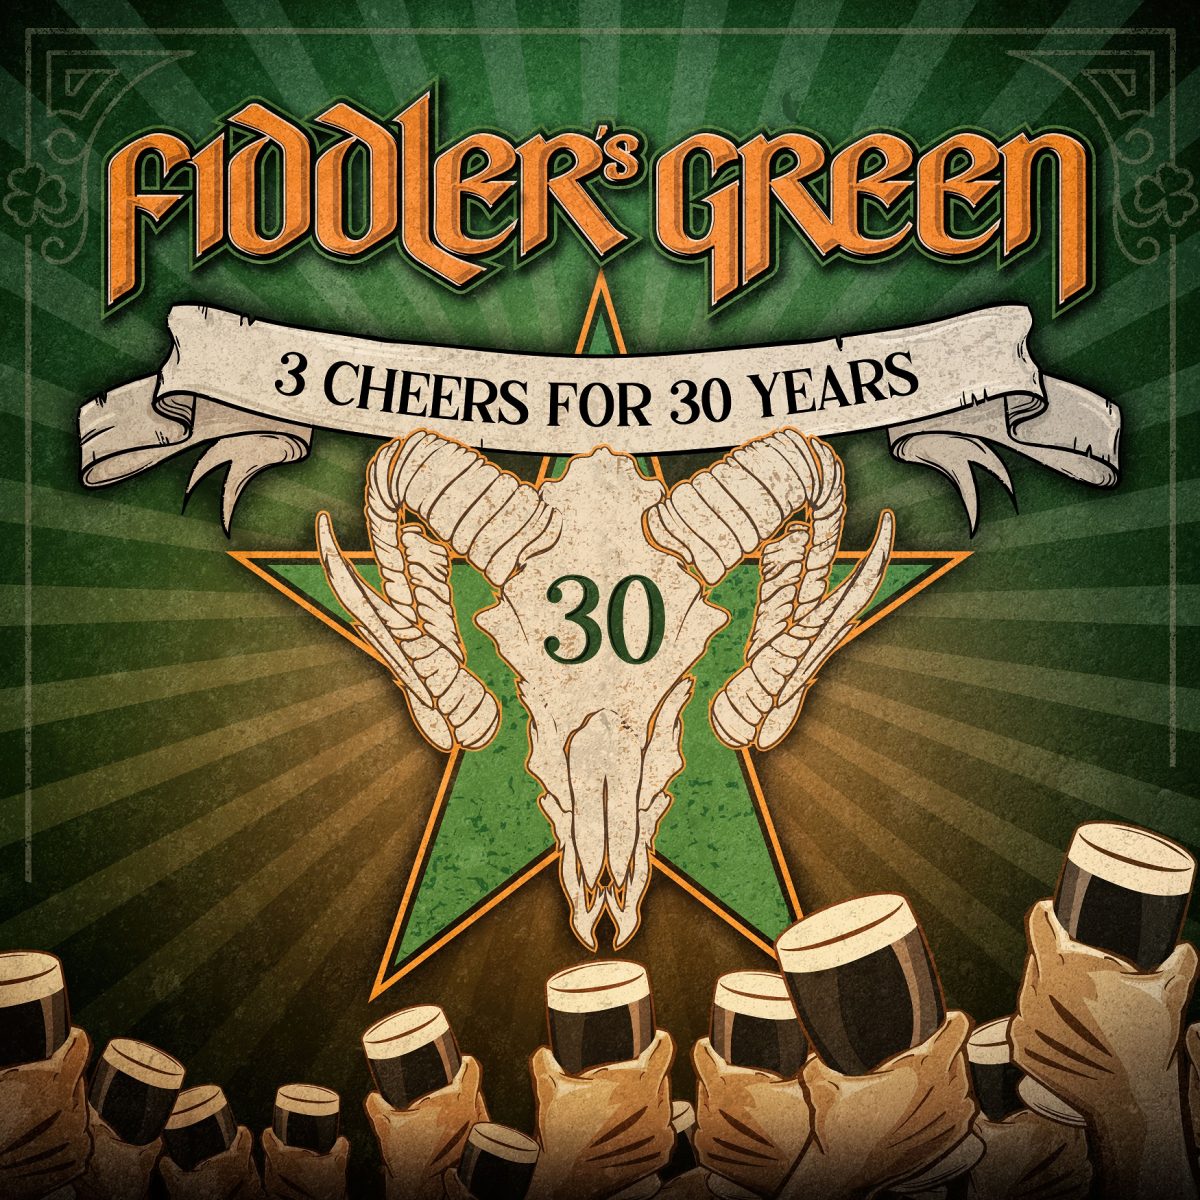 Fiddlers Green_3 cheers for 30 years